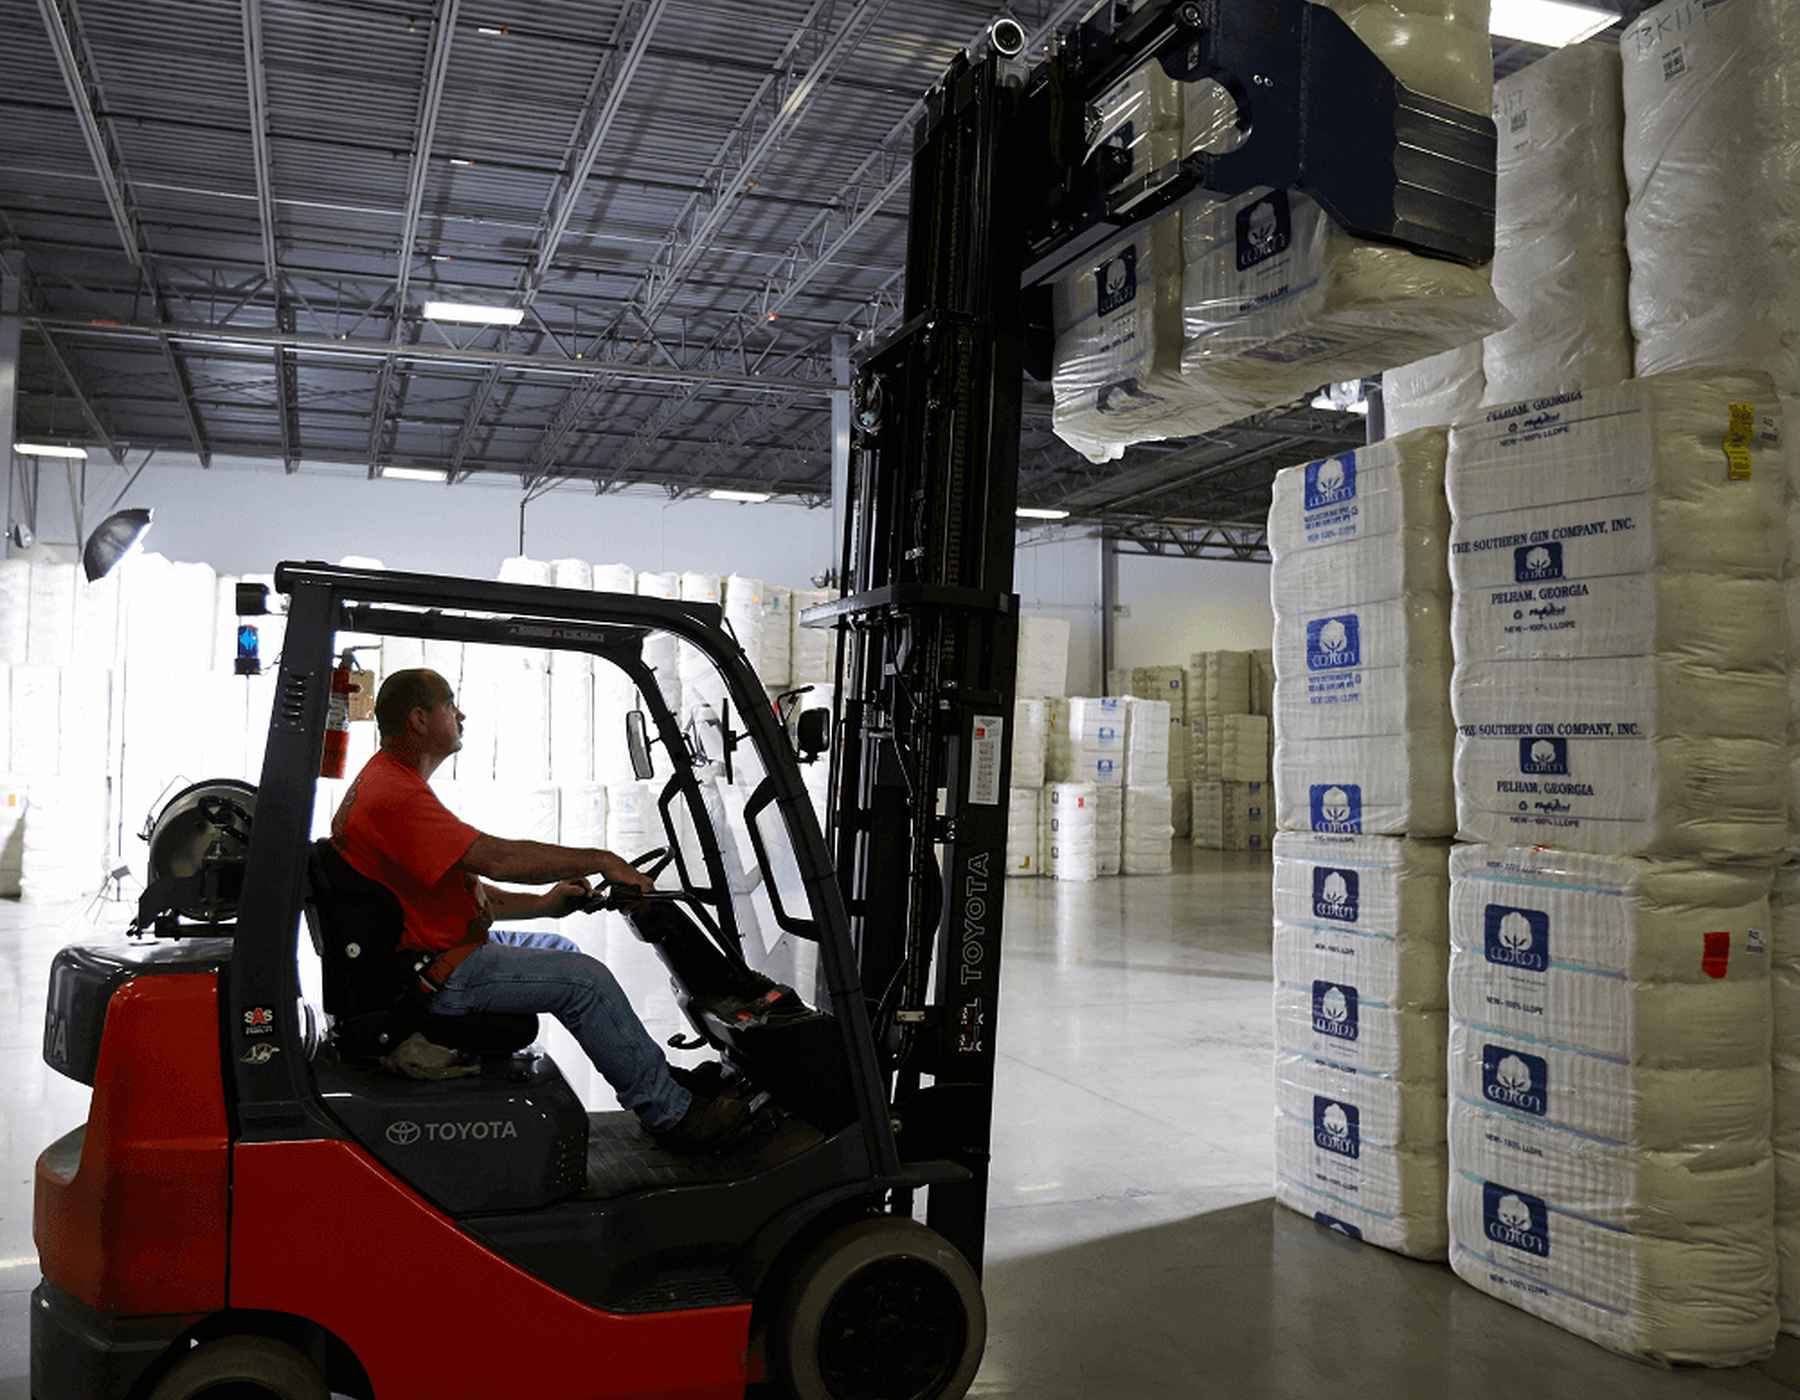 A Gildan employee is using a forklift to lift a package of cotton.